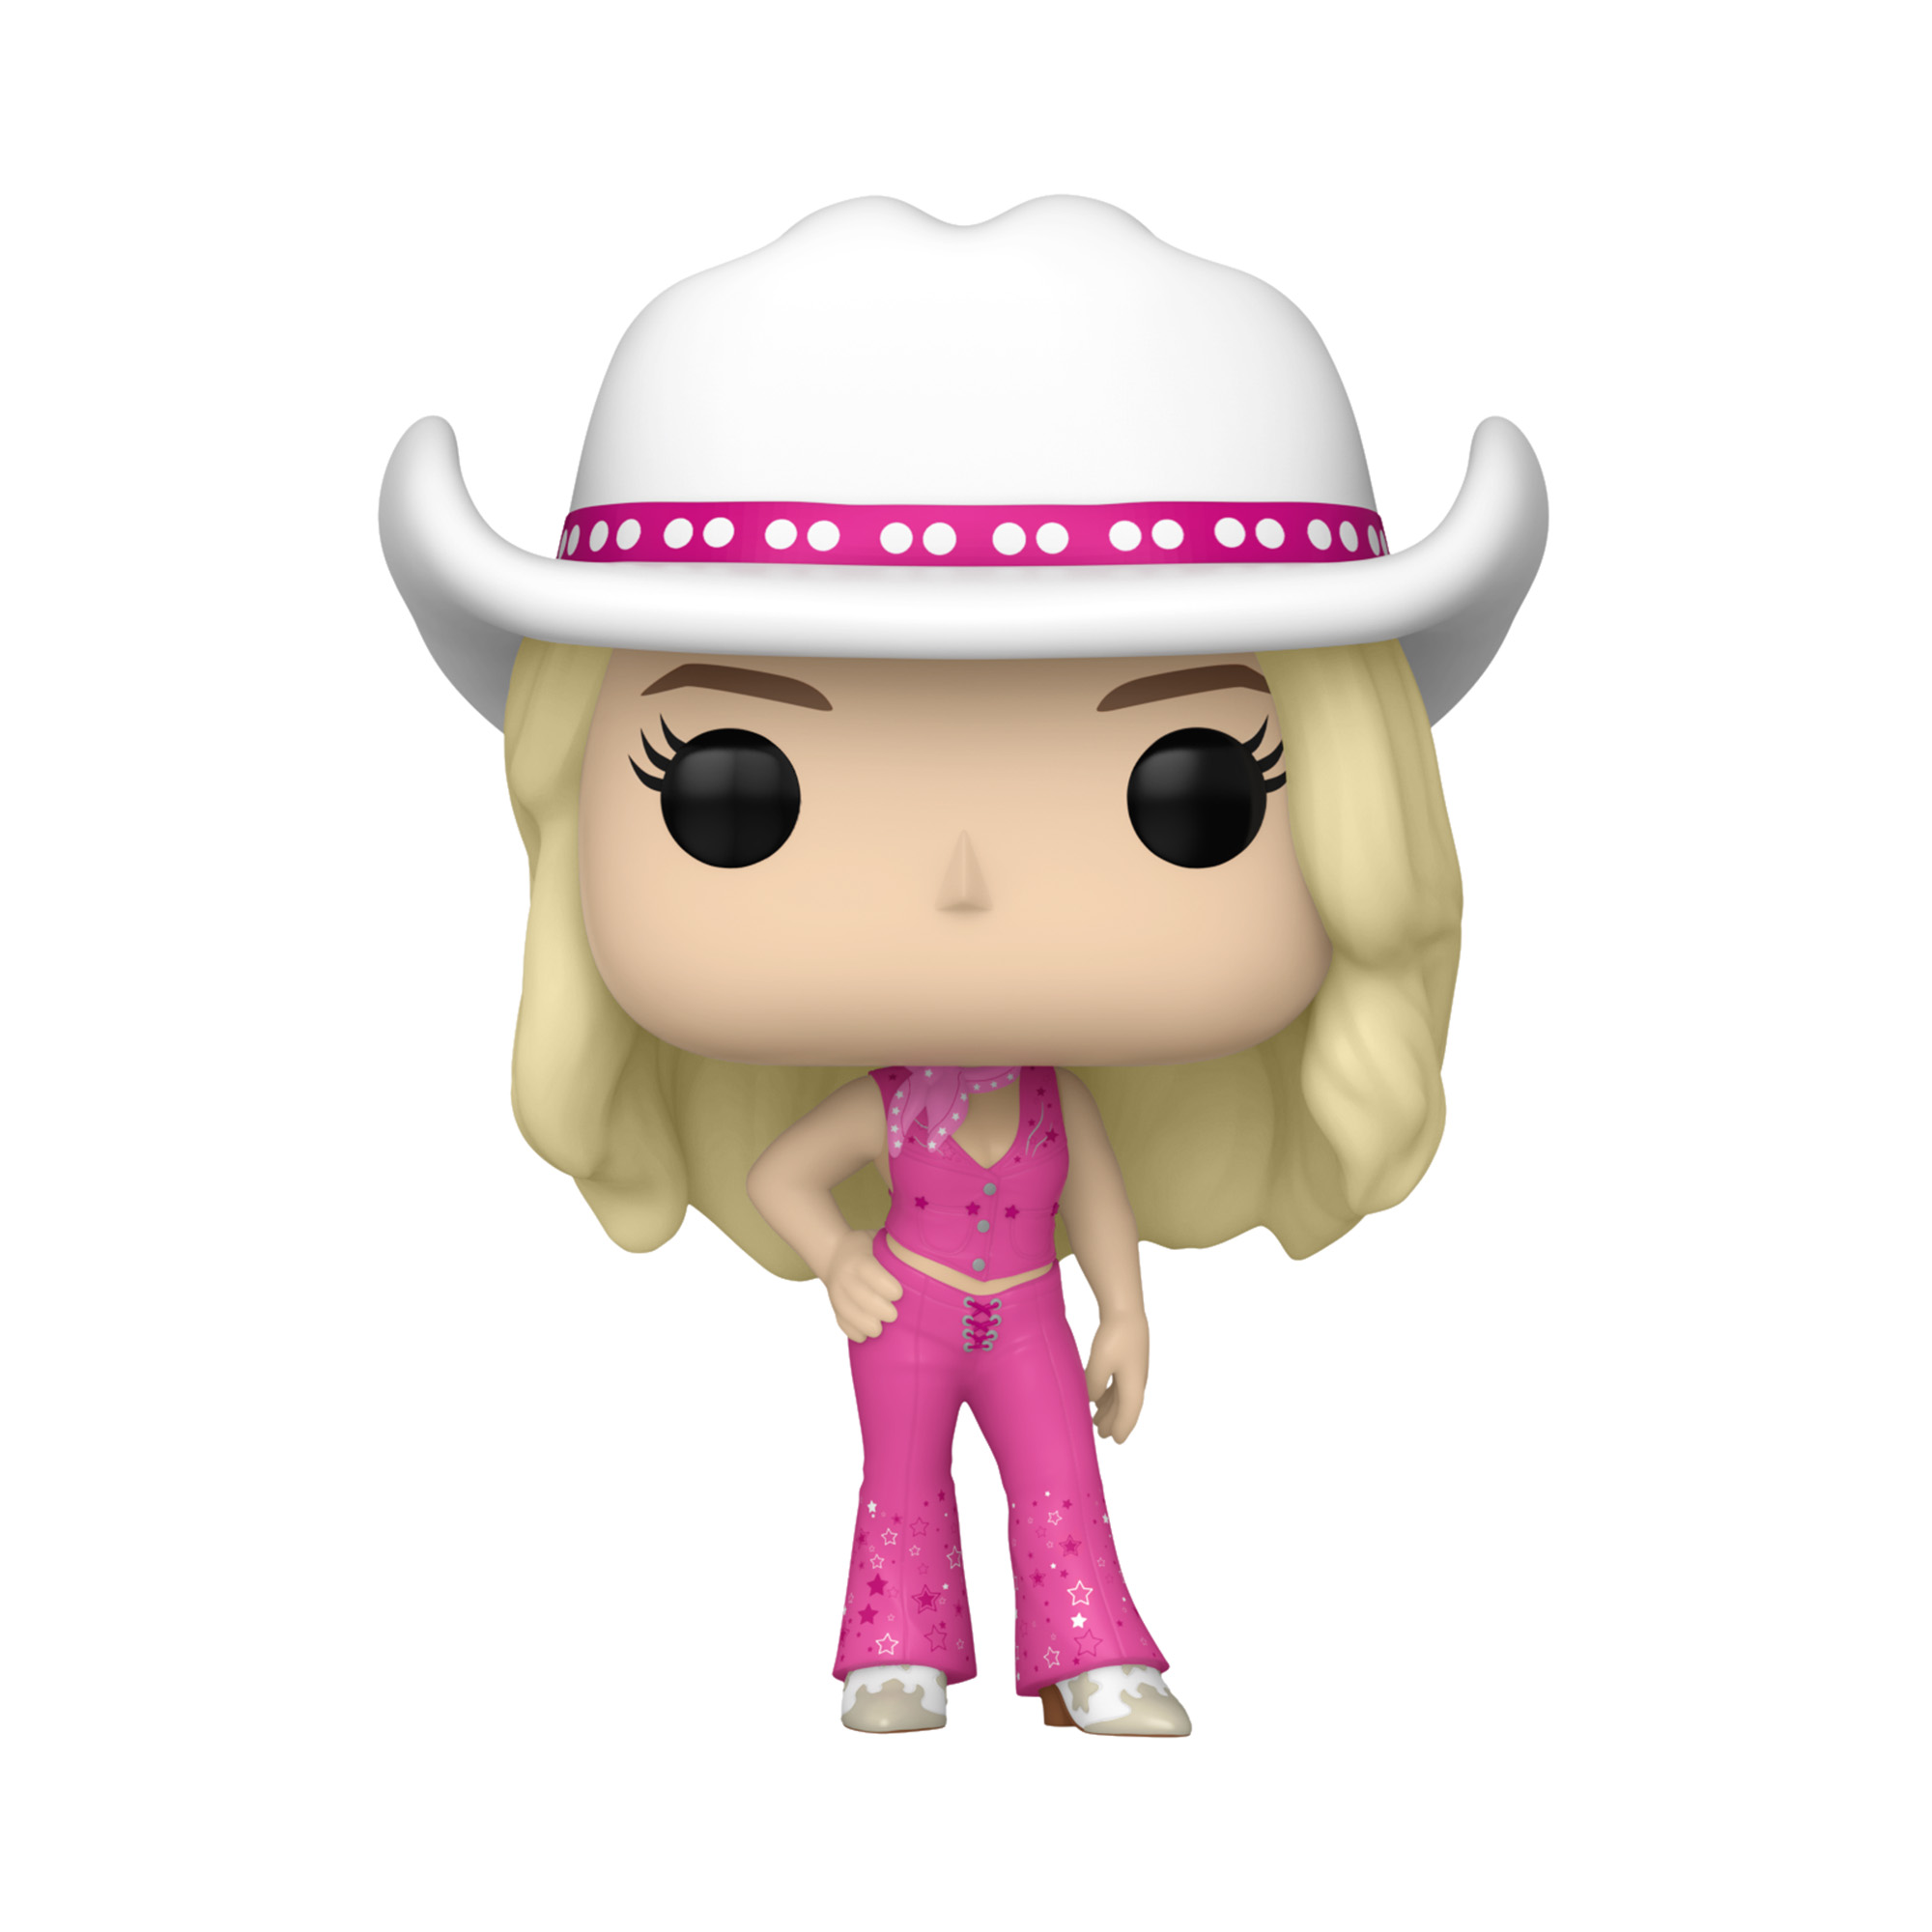 Pop! Western Barbie wears a pink cowgirl outfit with a white cowboy hat.